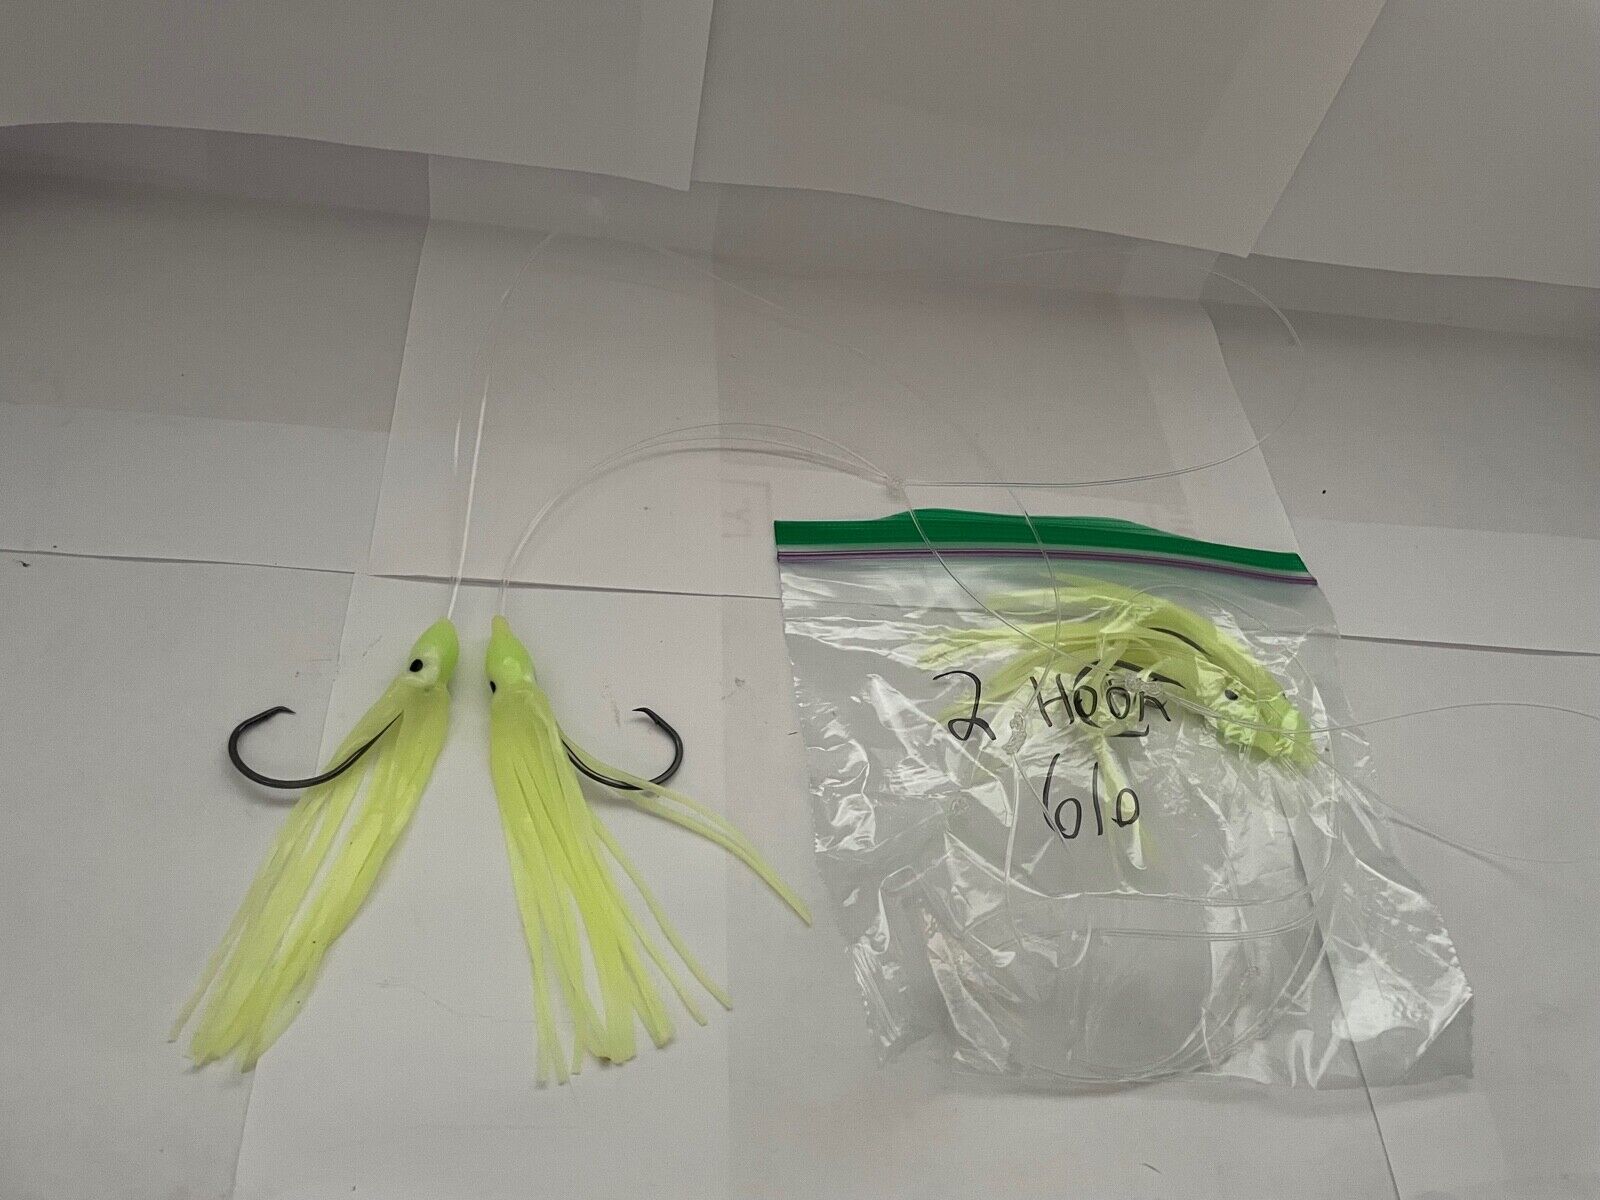 Max 80% OFF Deep Ranking TOP8 Drop glow squid fishing rigs - and individually labe packed